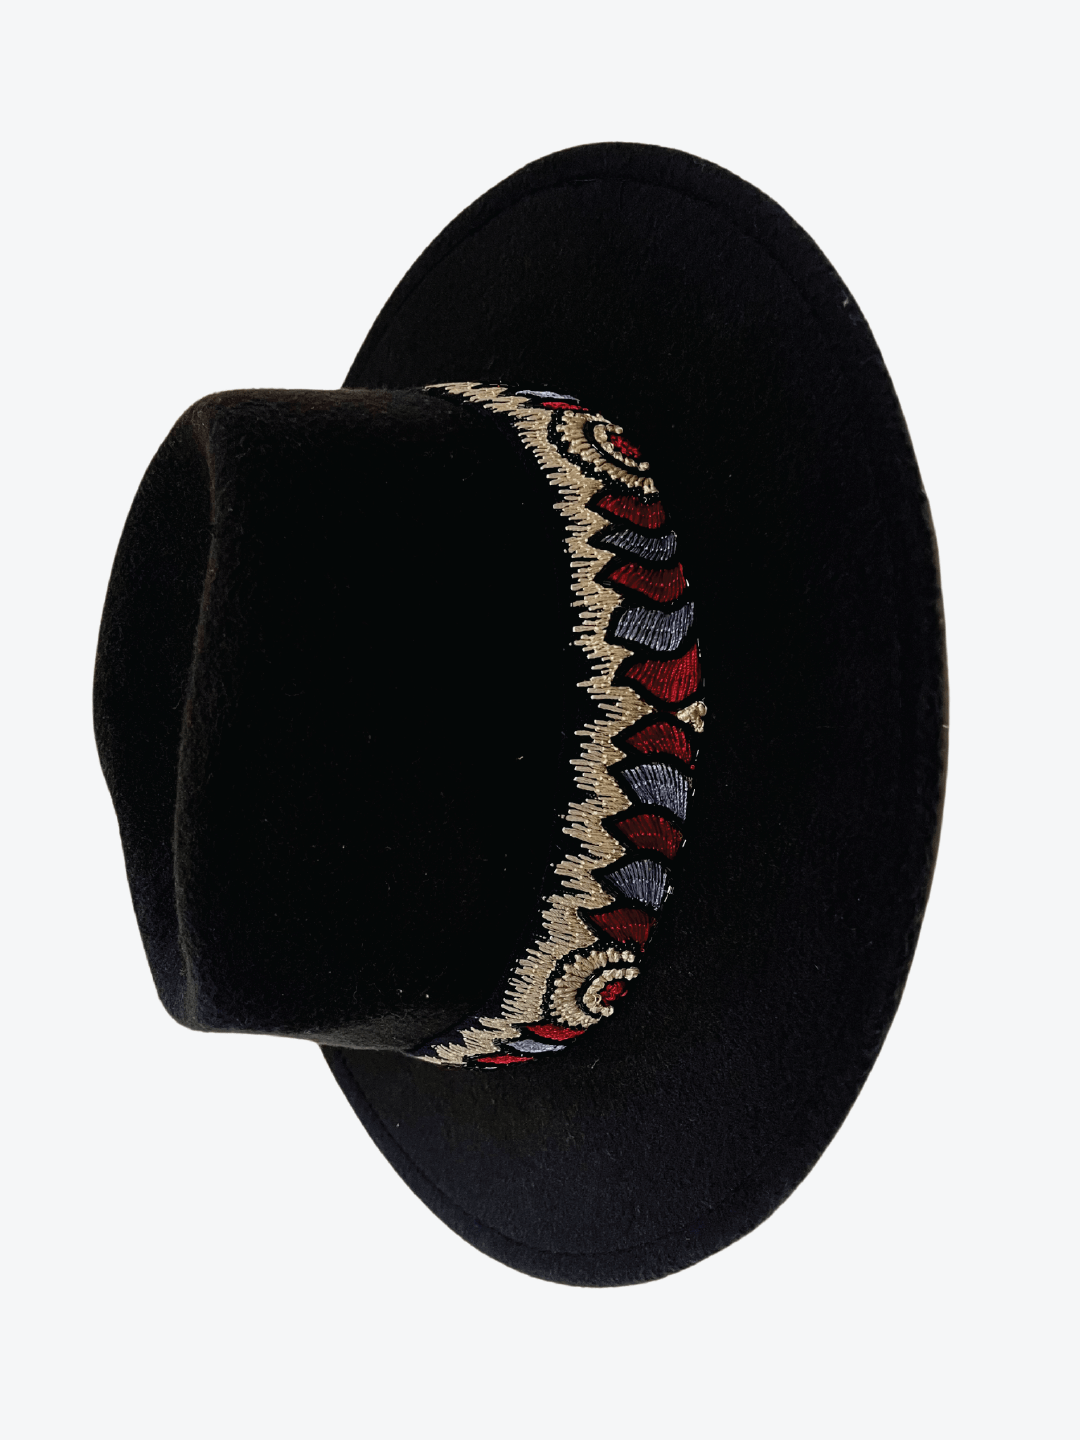 Embroidered Ikat Hat